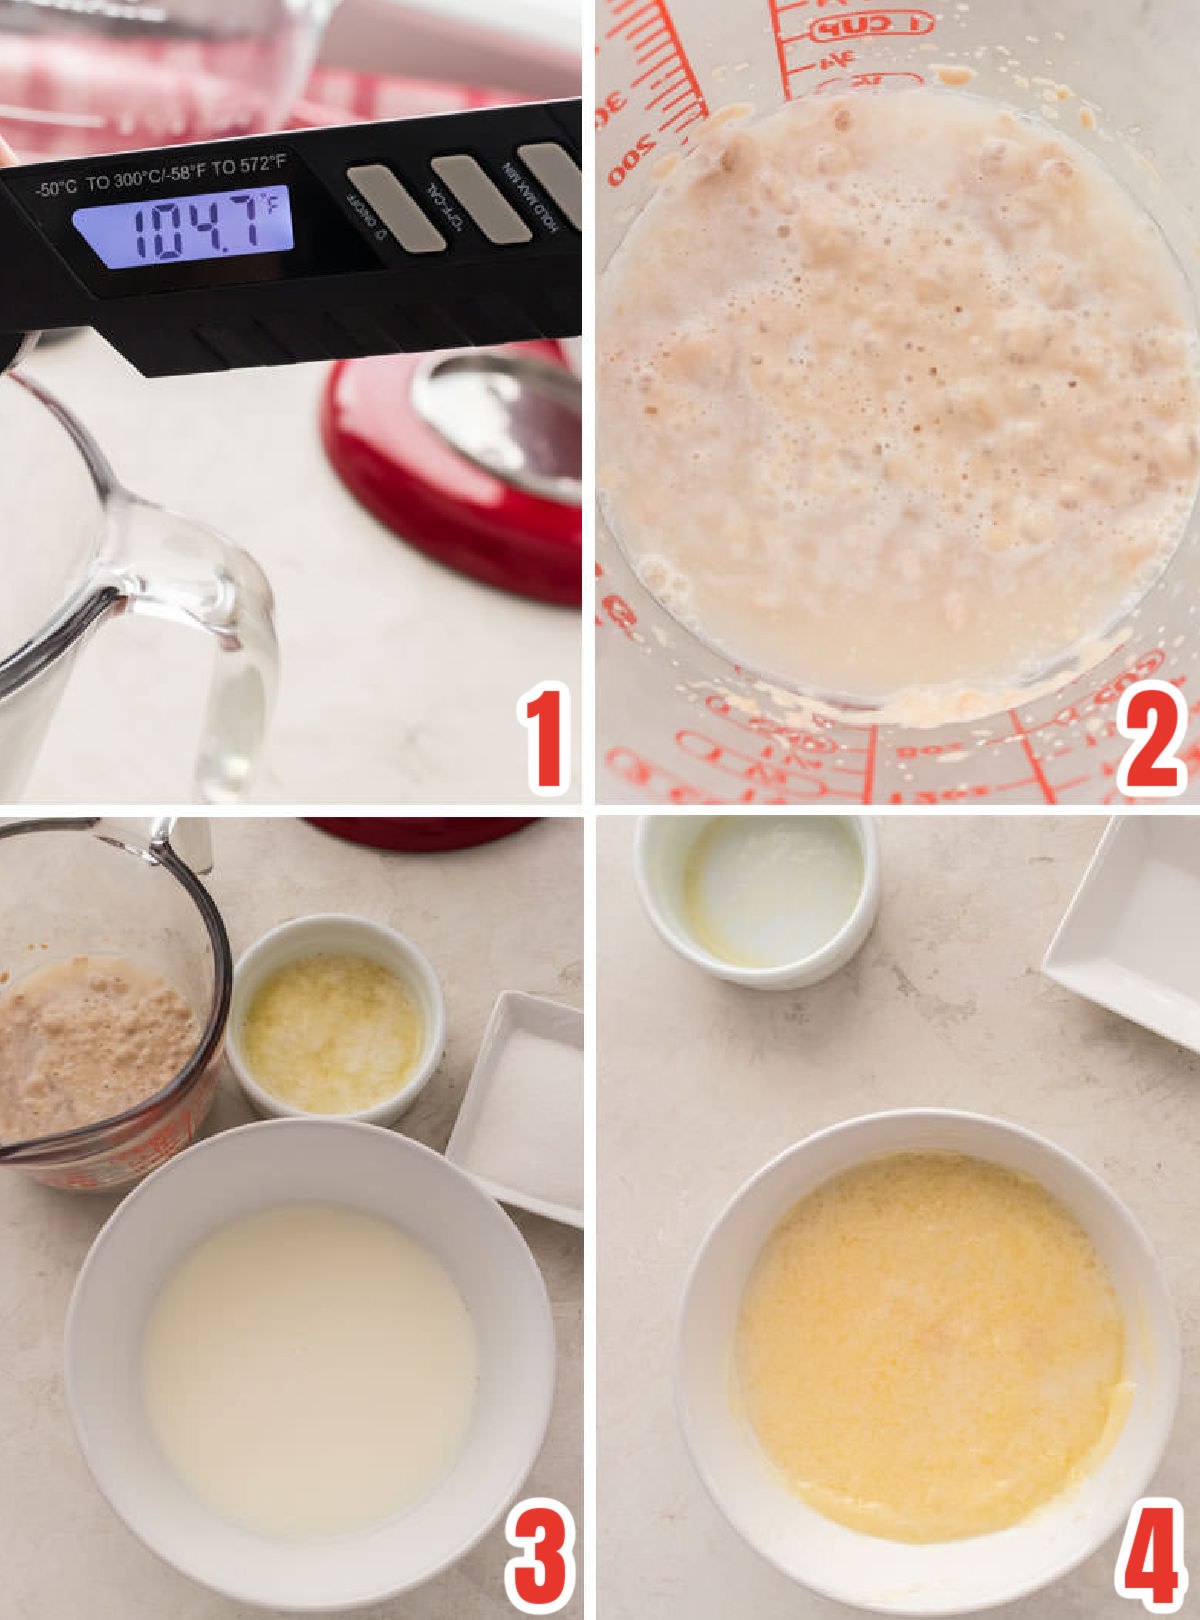 Collage image showing the steps for preparing the yeast and liquid ingredients for the dough.